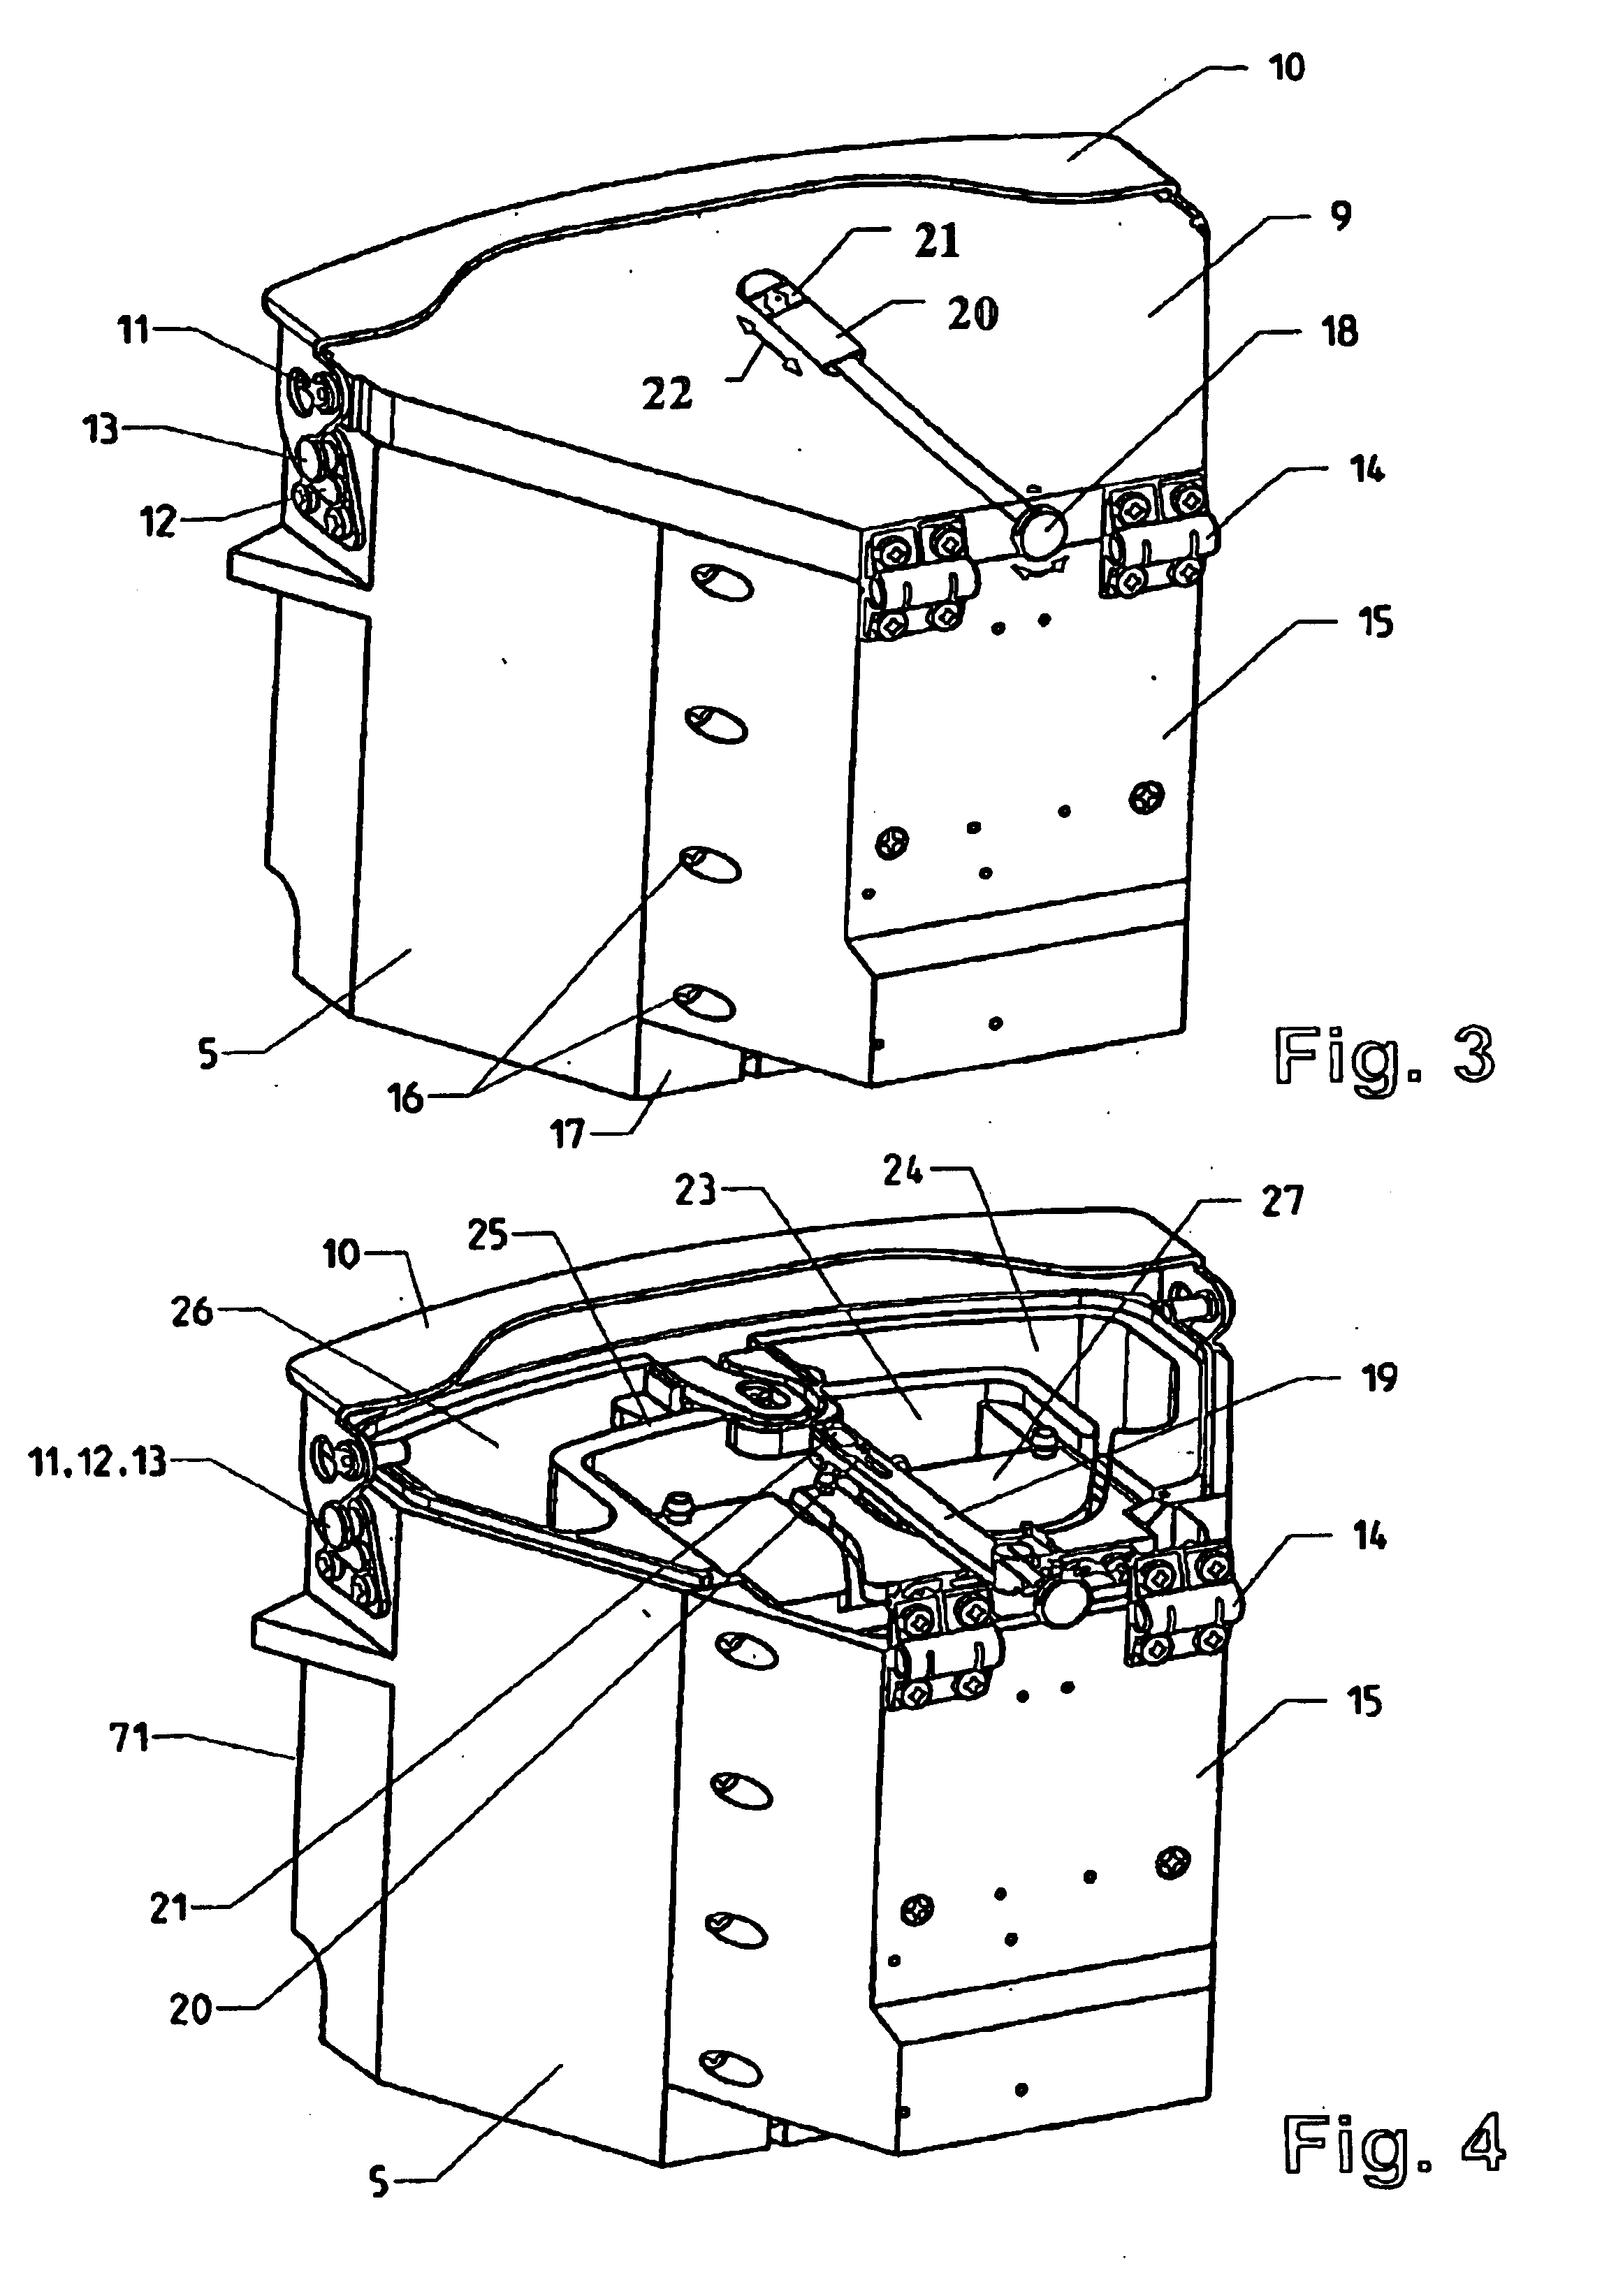 Centrifuge comprising a blood bag system with an upper and lower outlet